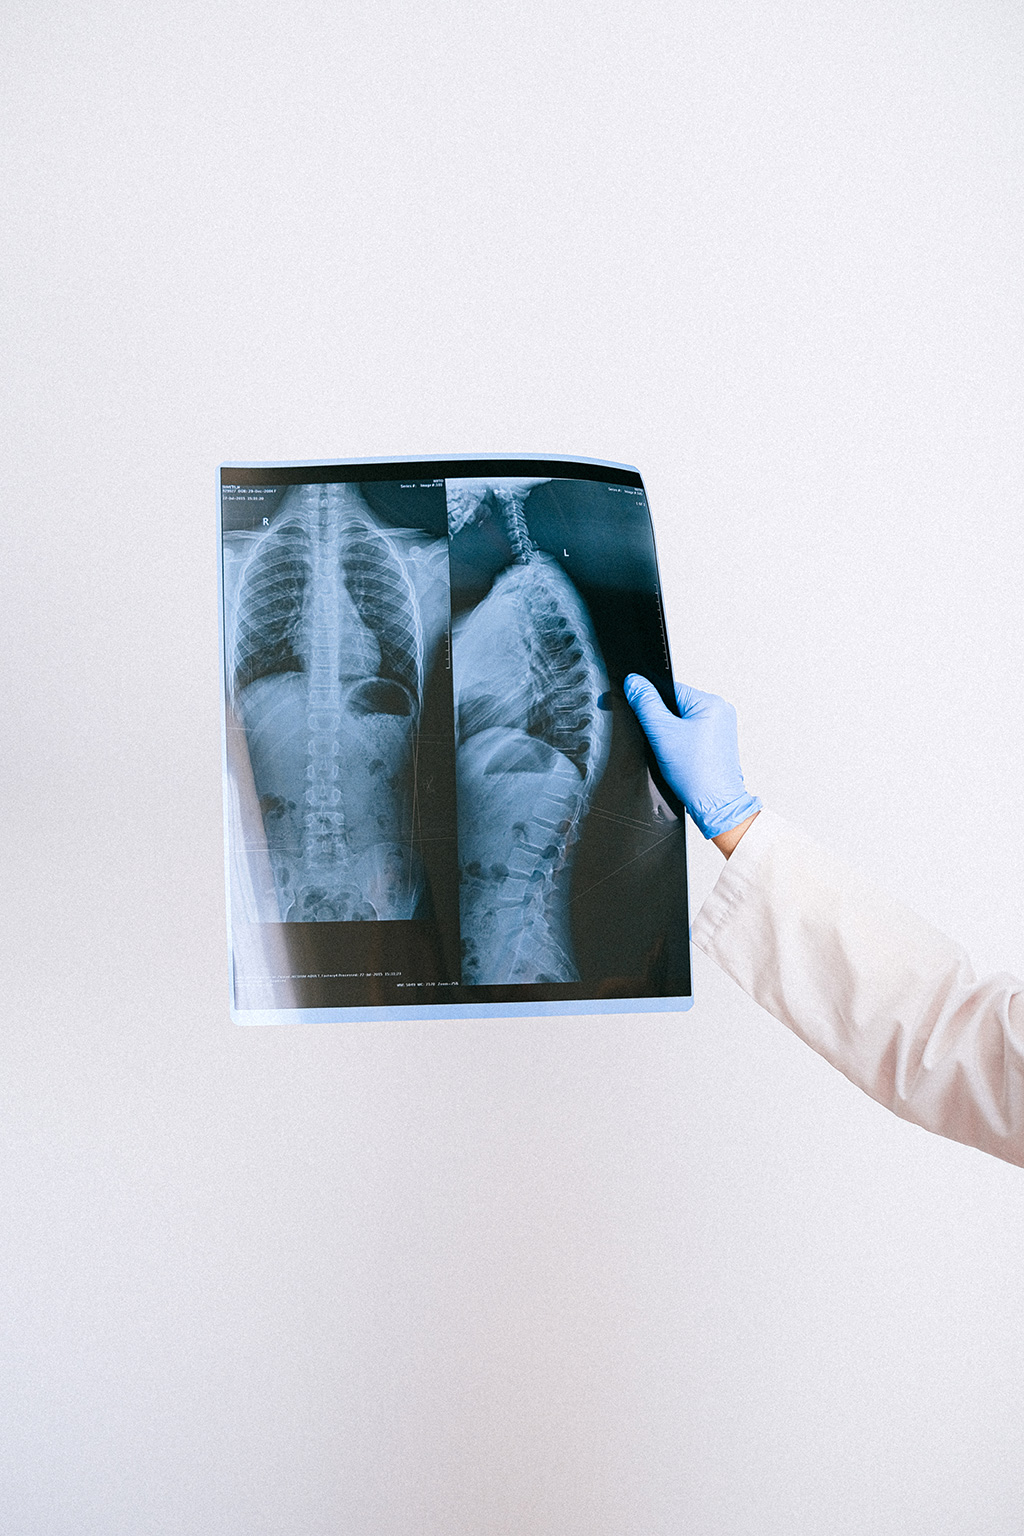 Image: An AI-based system has shown promise in tuberculosis detection (Photo courtesy of Pexels)